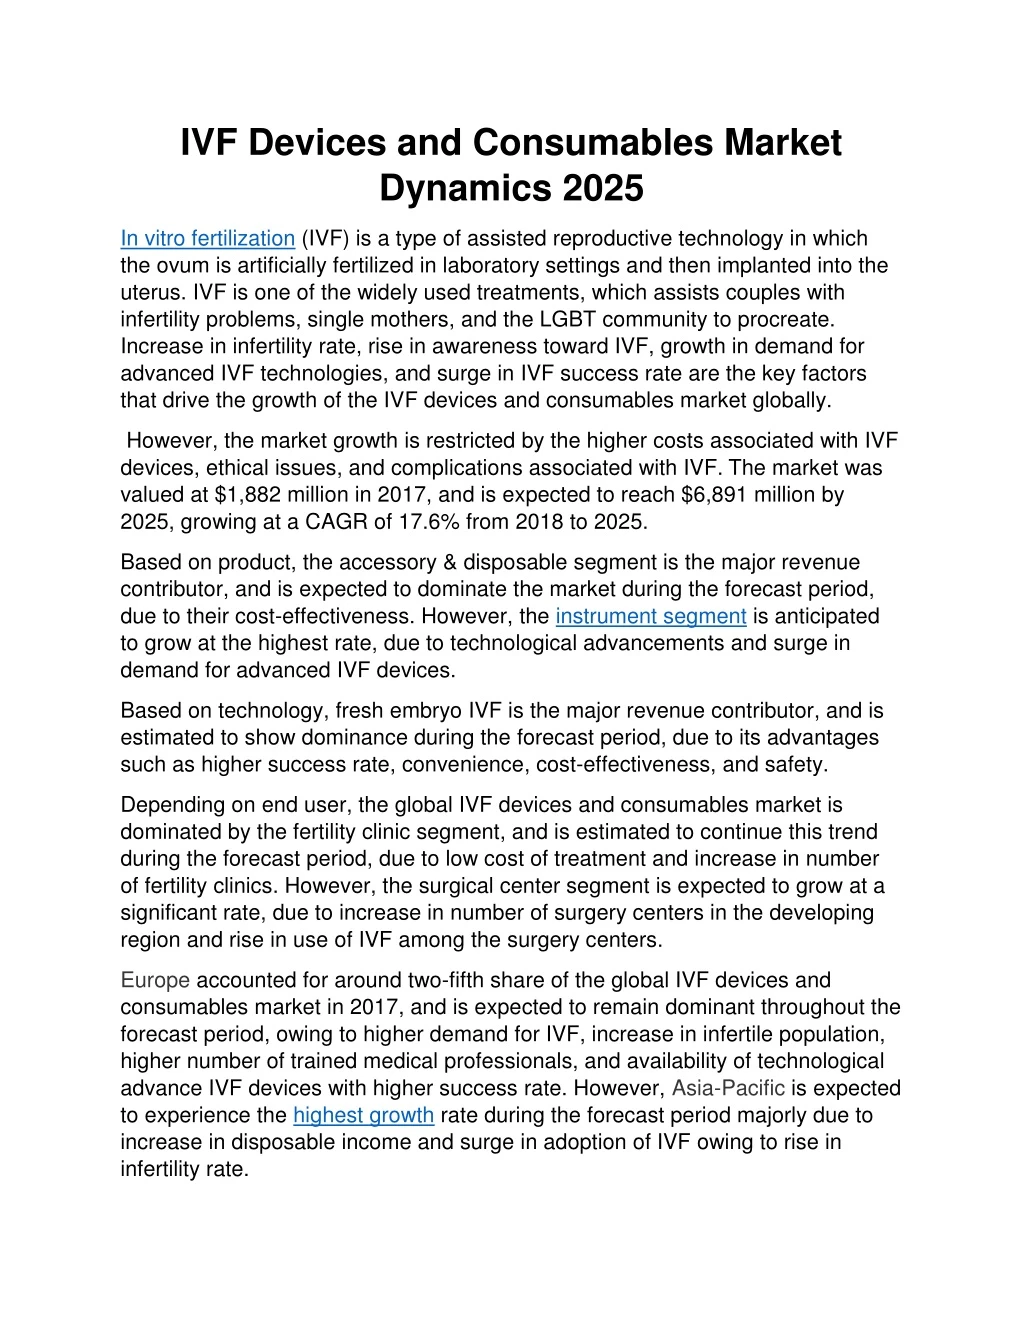 ivf devices and consumables market dynamics 2025